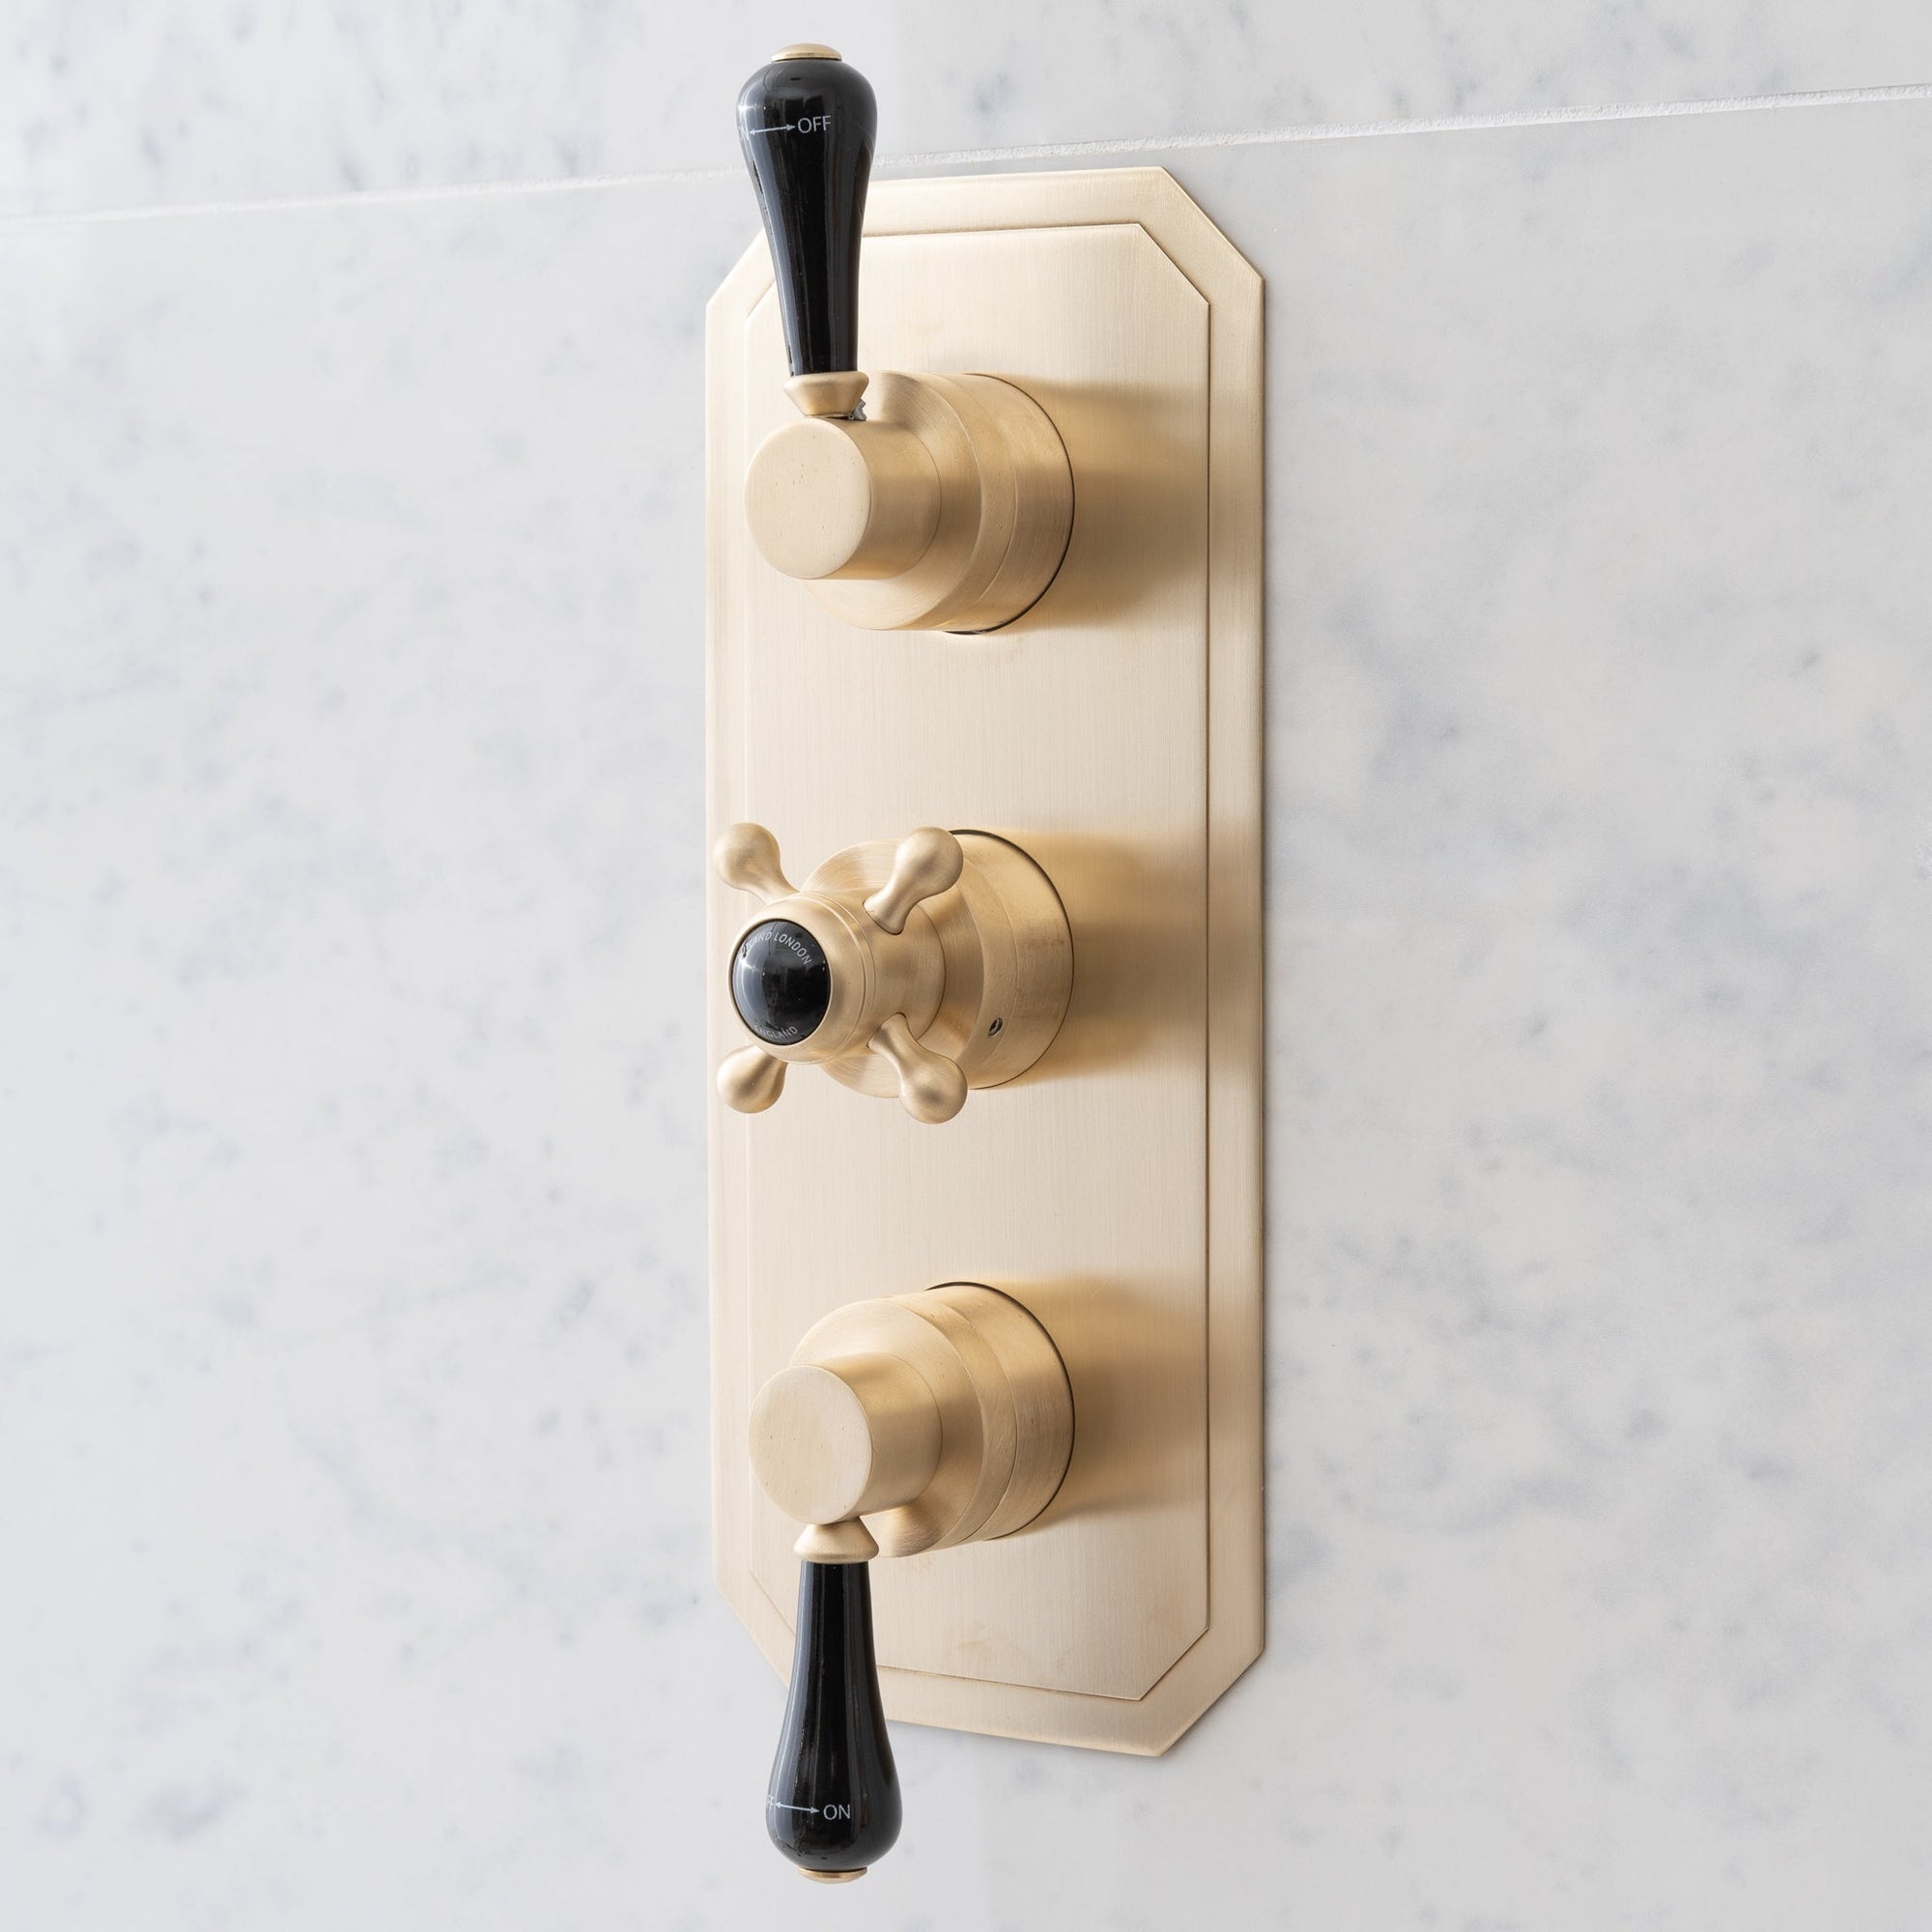 Chesterton Two Function Black Ceramic Lever Concealed Thermostatic Shower Valve & Trim - Rutland London (USA)